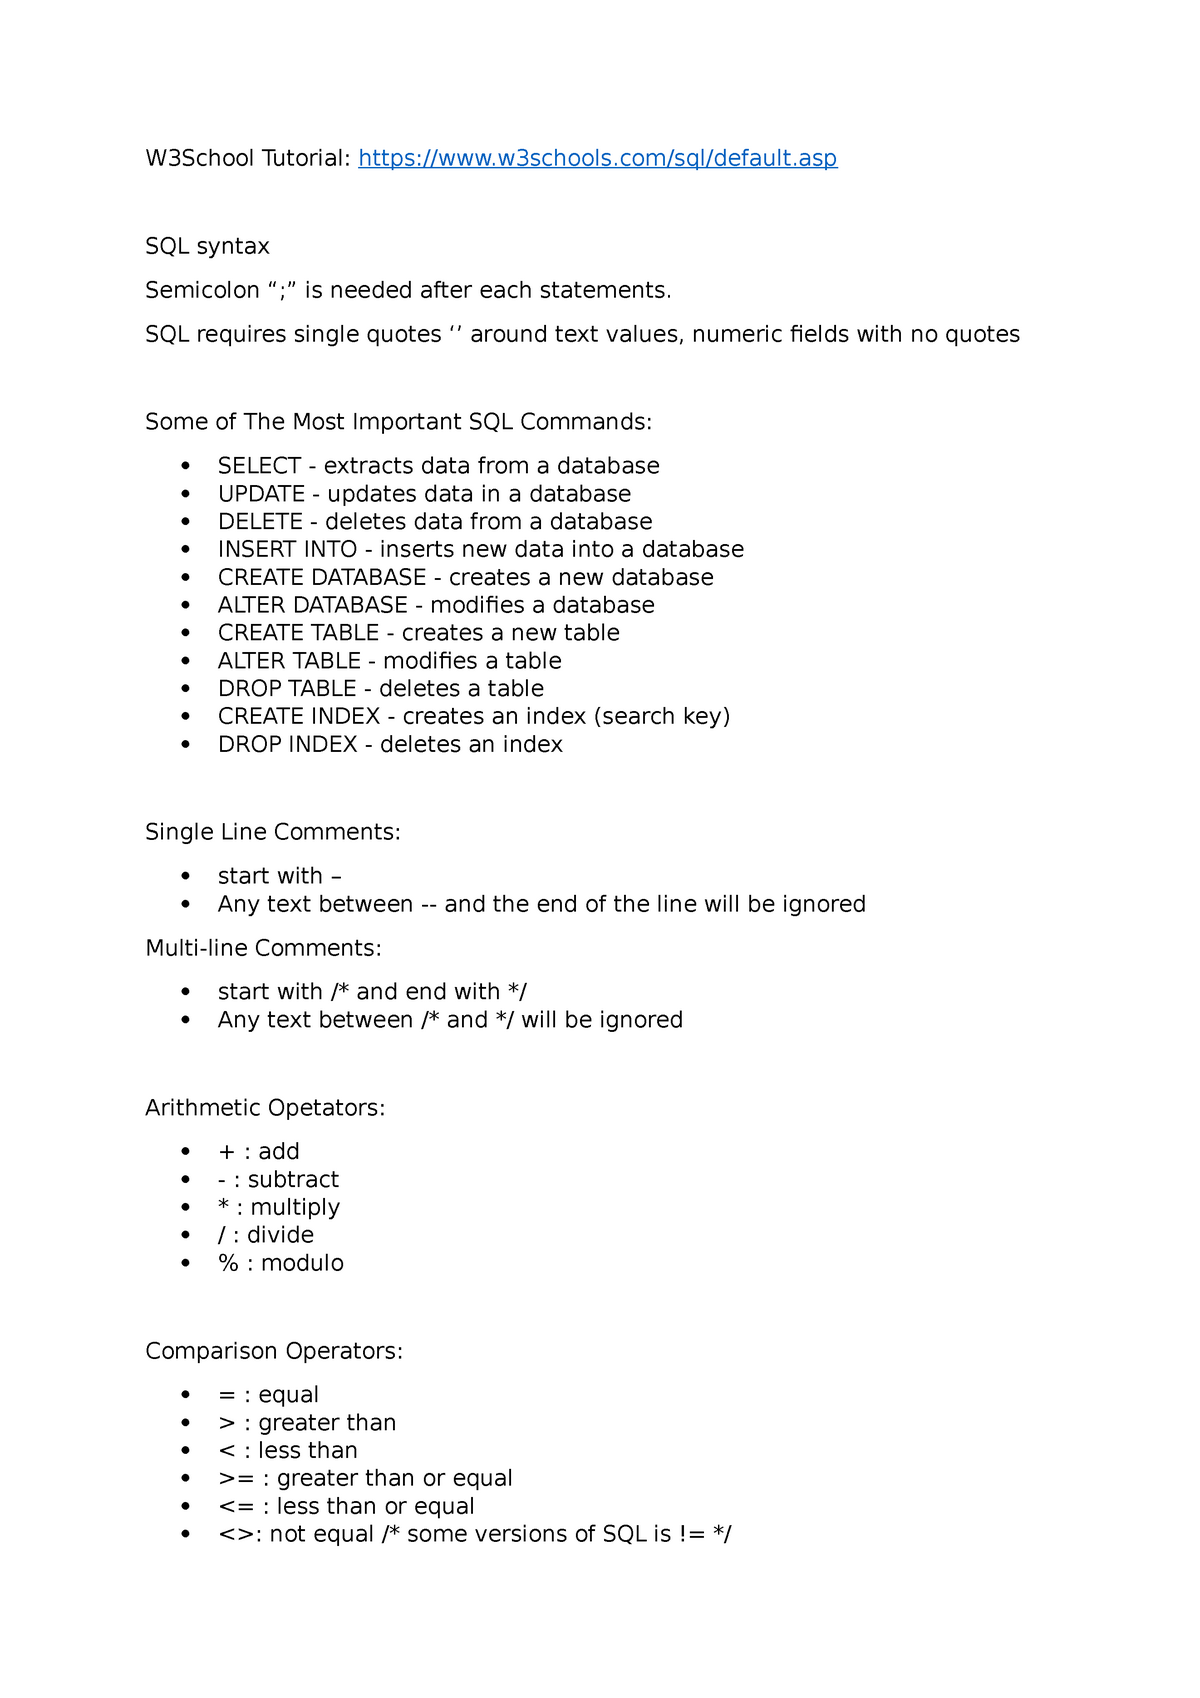 picnic Obligate administration SQL notes - This note is based on SQL w3school tutorial - W3School  Tutorial: - StuDocu